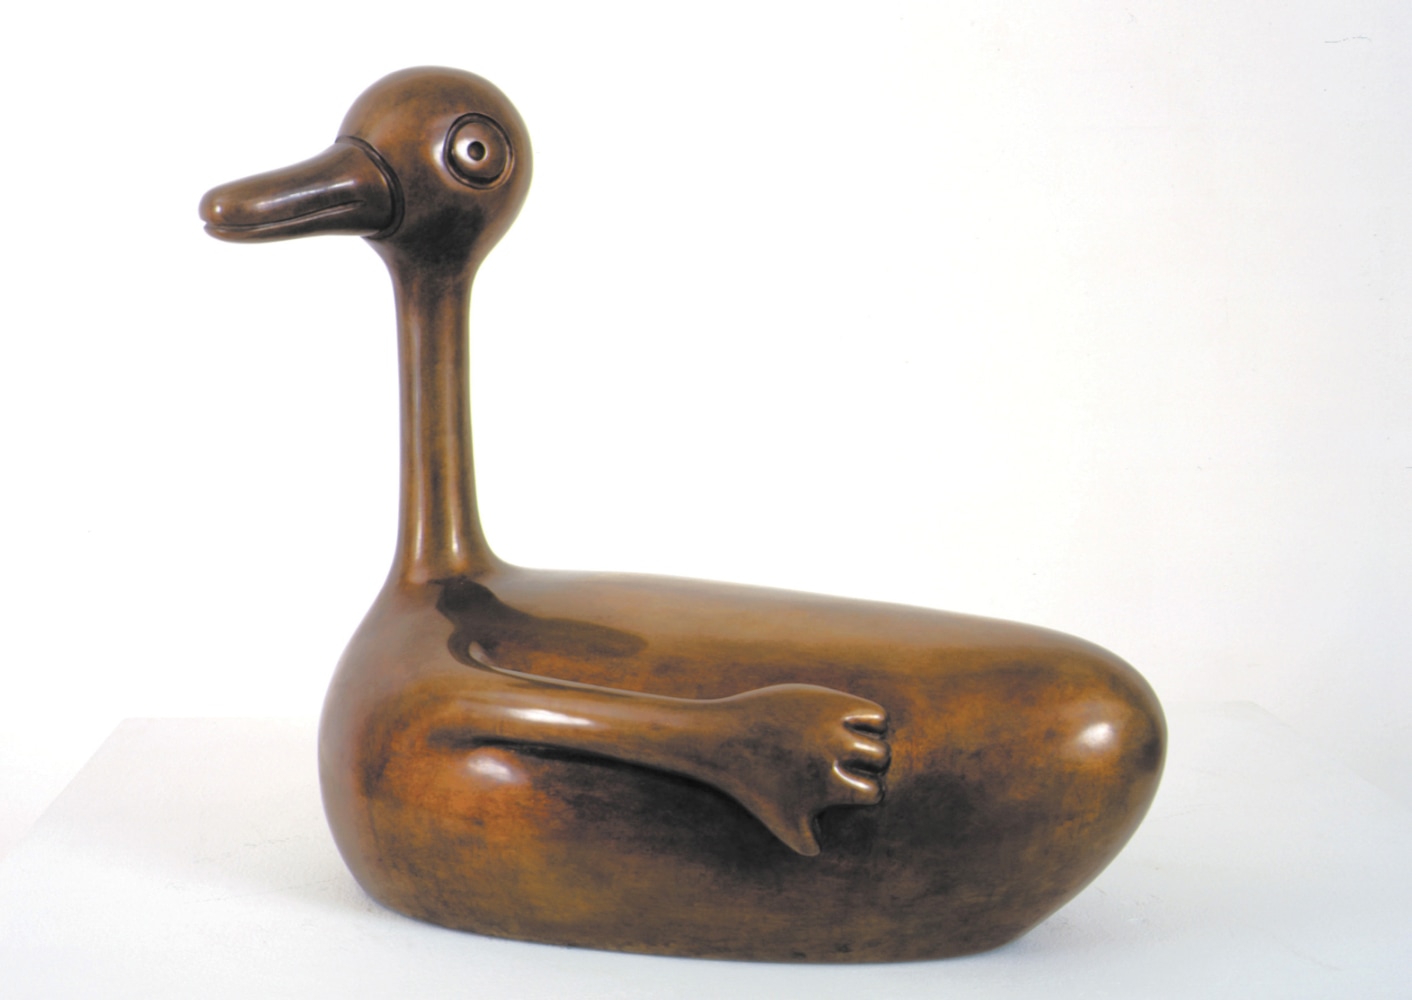 Tom Otterness
Duck, 2003
bronze, edition of 6
17 1/2 x 19 x 11 in. / 44.5 x 48.3 x 27.9 cm